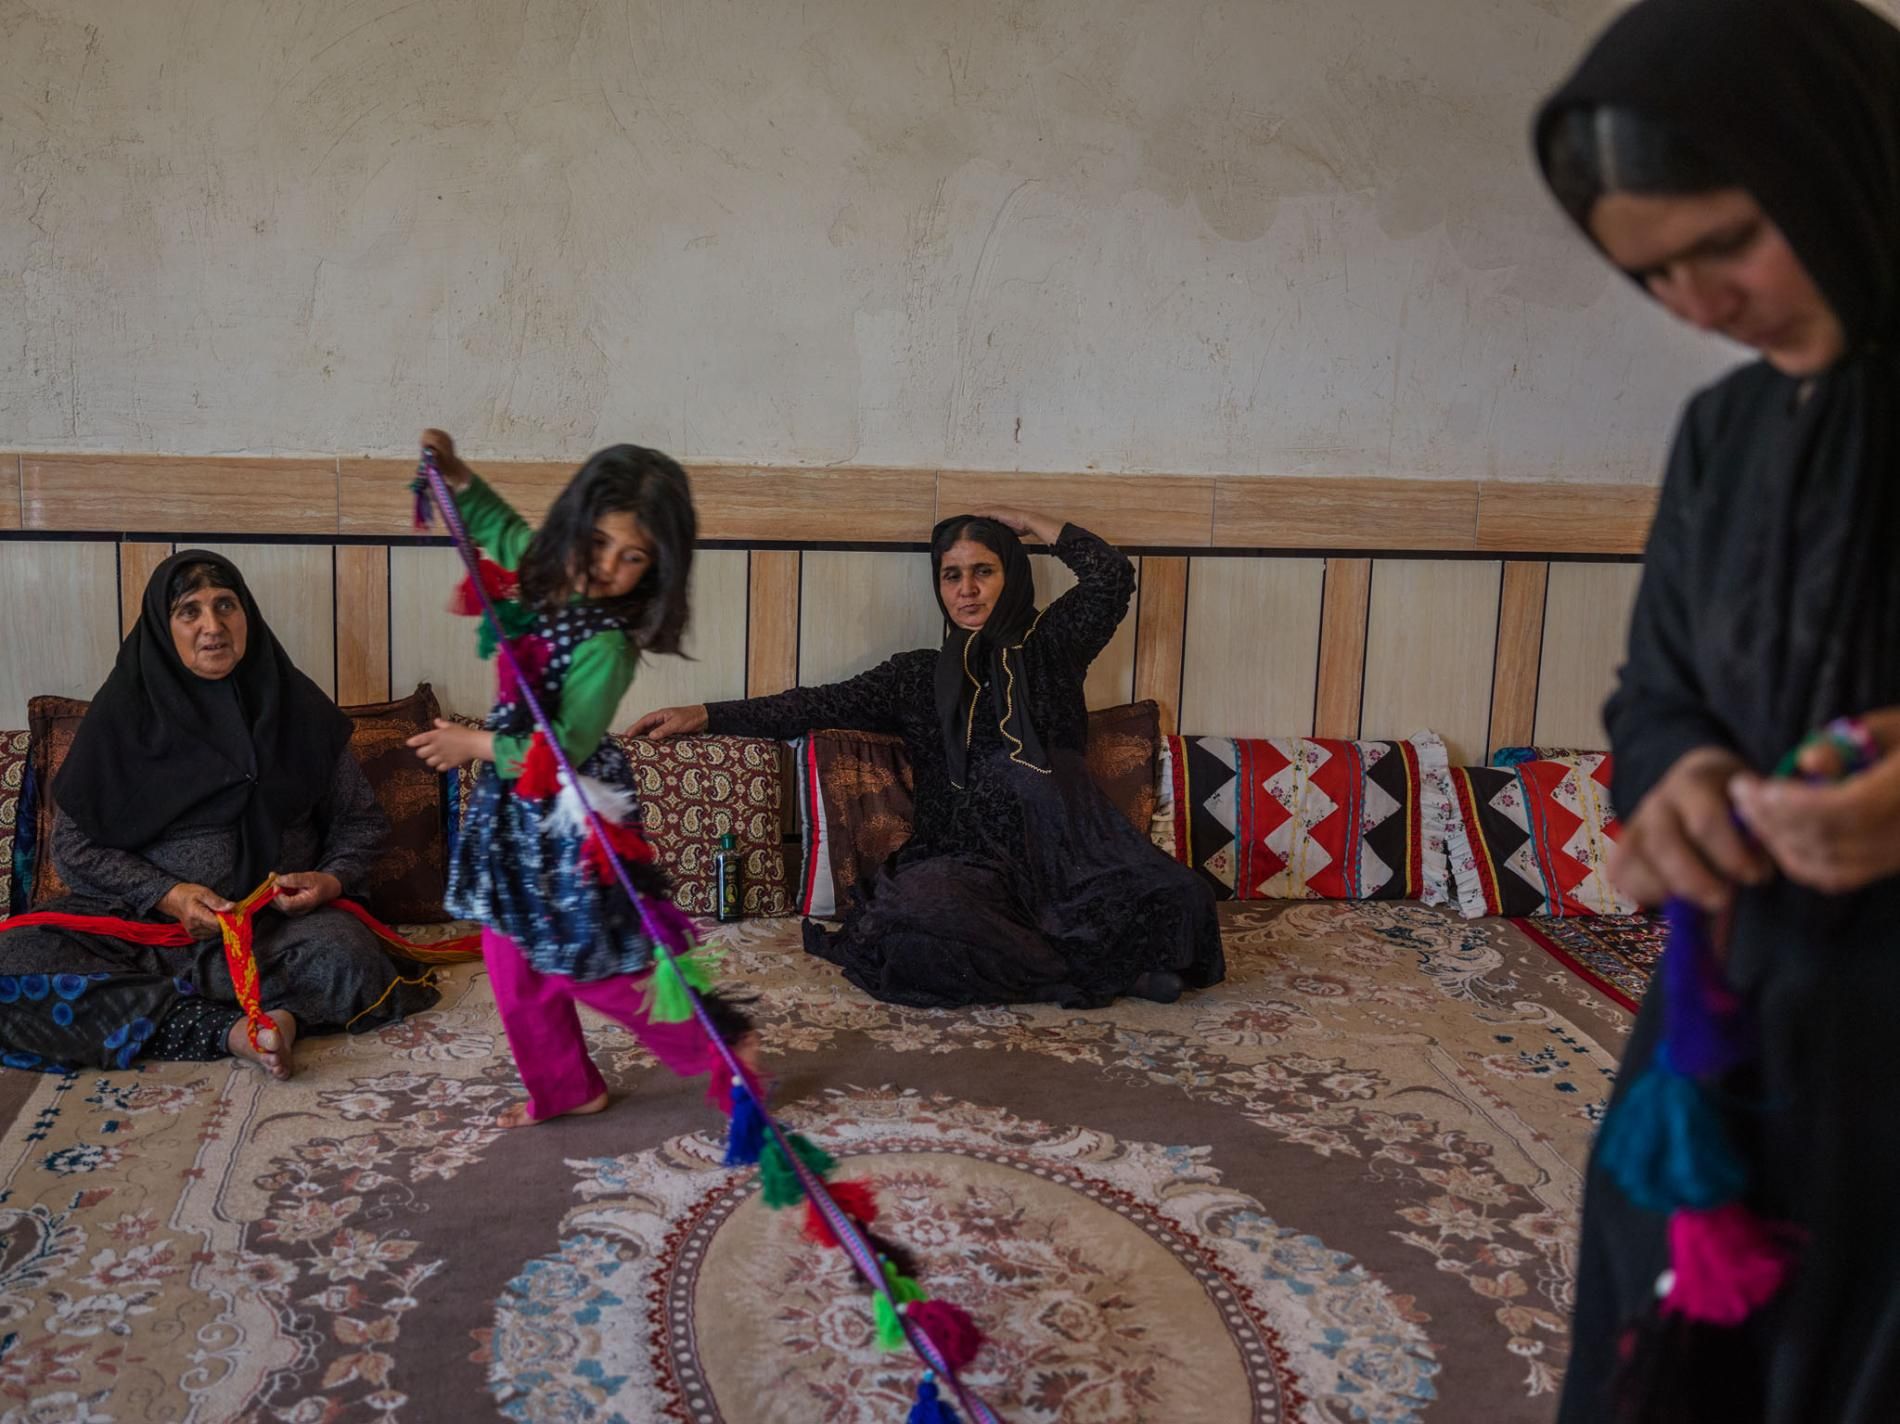 Bibi Jan Mokhtari (center), 57, and Mahpasand Mokhtari (left), 62, are living in a house for the first time. Elham Mokhtari, six, plays with a handicraft made by her mother, Mahnaz Mokhtari (far right), 39. The family makes and sells handicrafts as a main source of income. Image by Newsha Tavakolian. Iran, 2018.